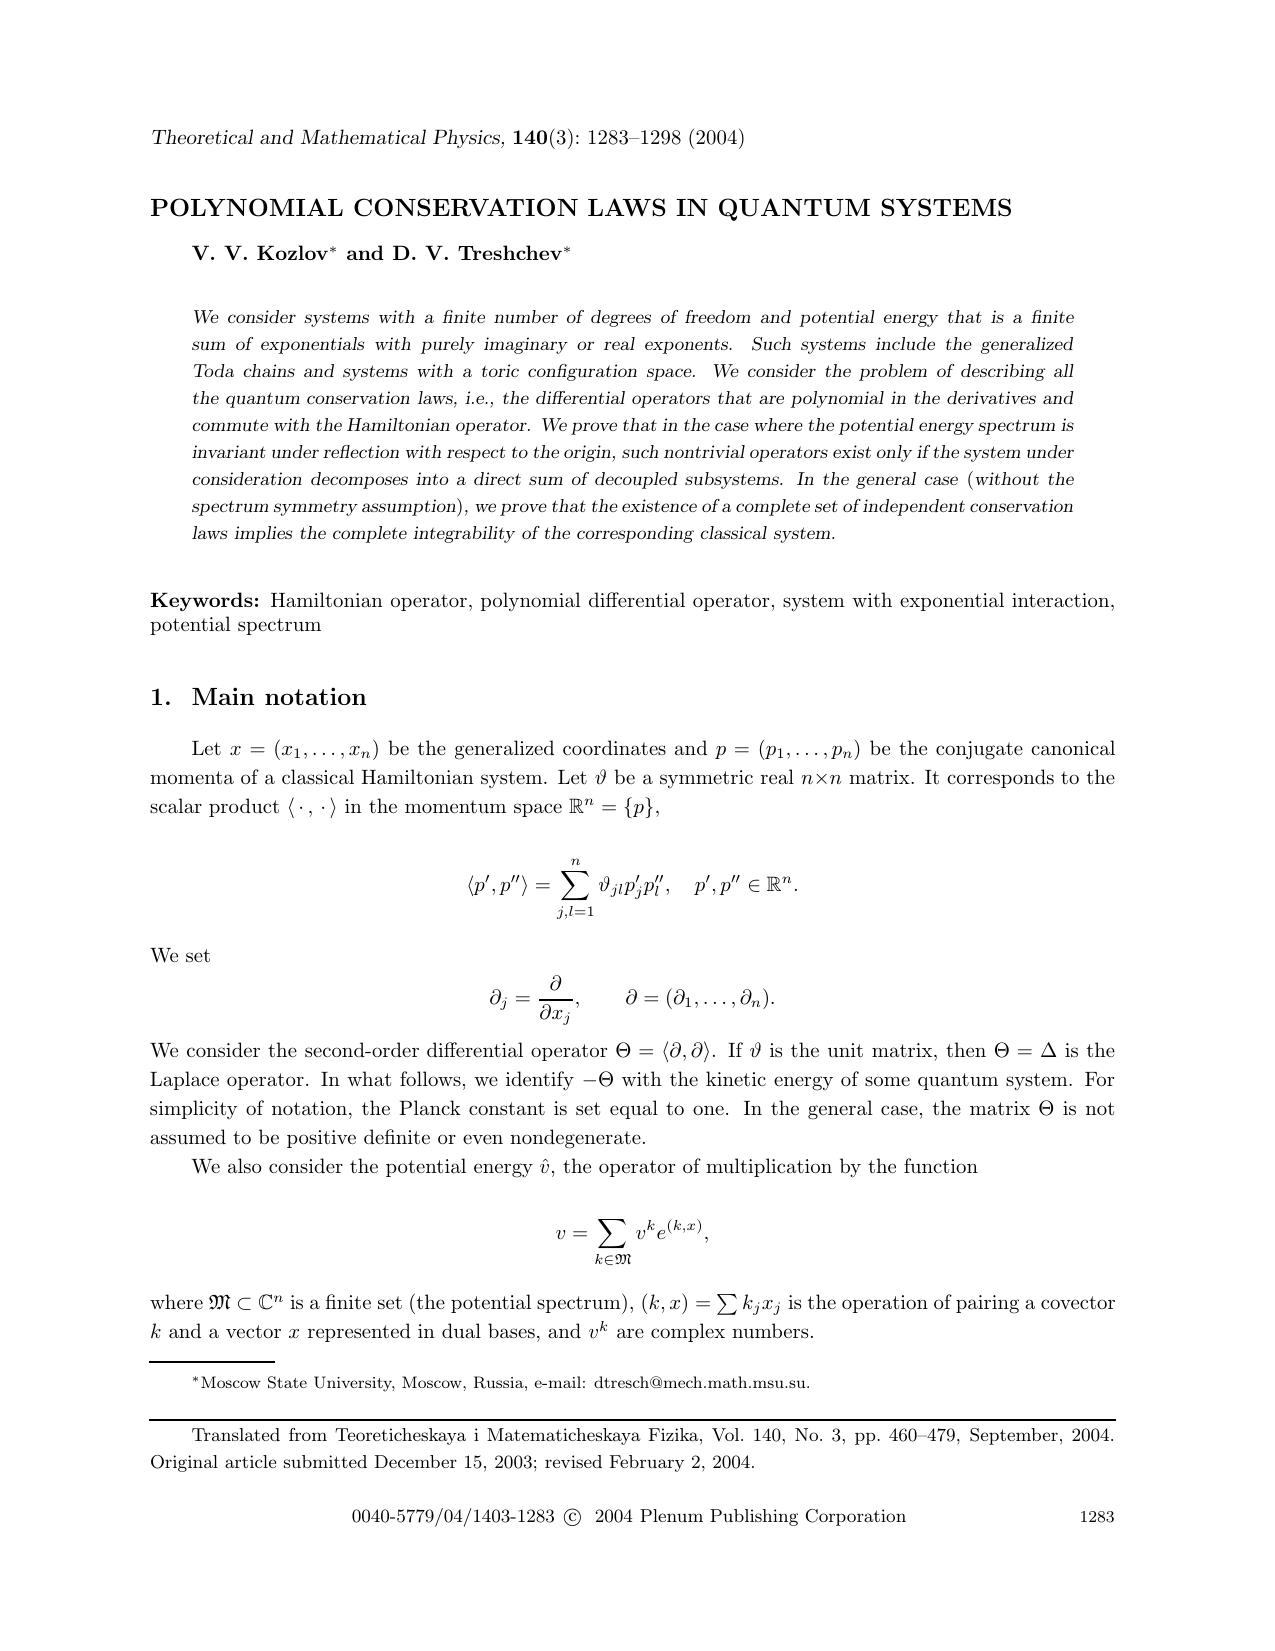 Polynomial Conservation Laws in Quantum Systems by Unknown